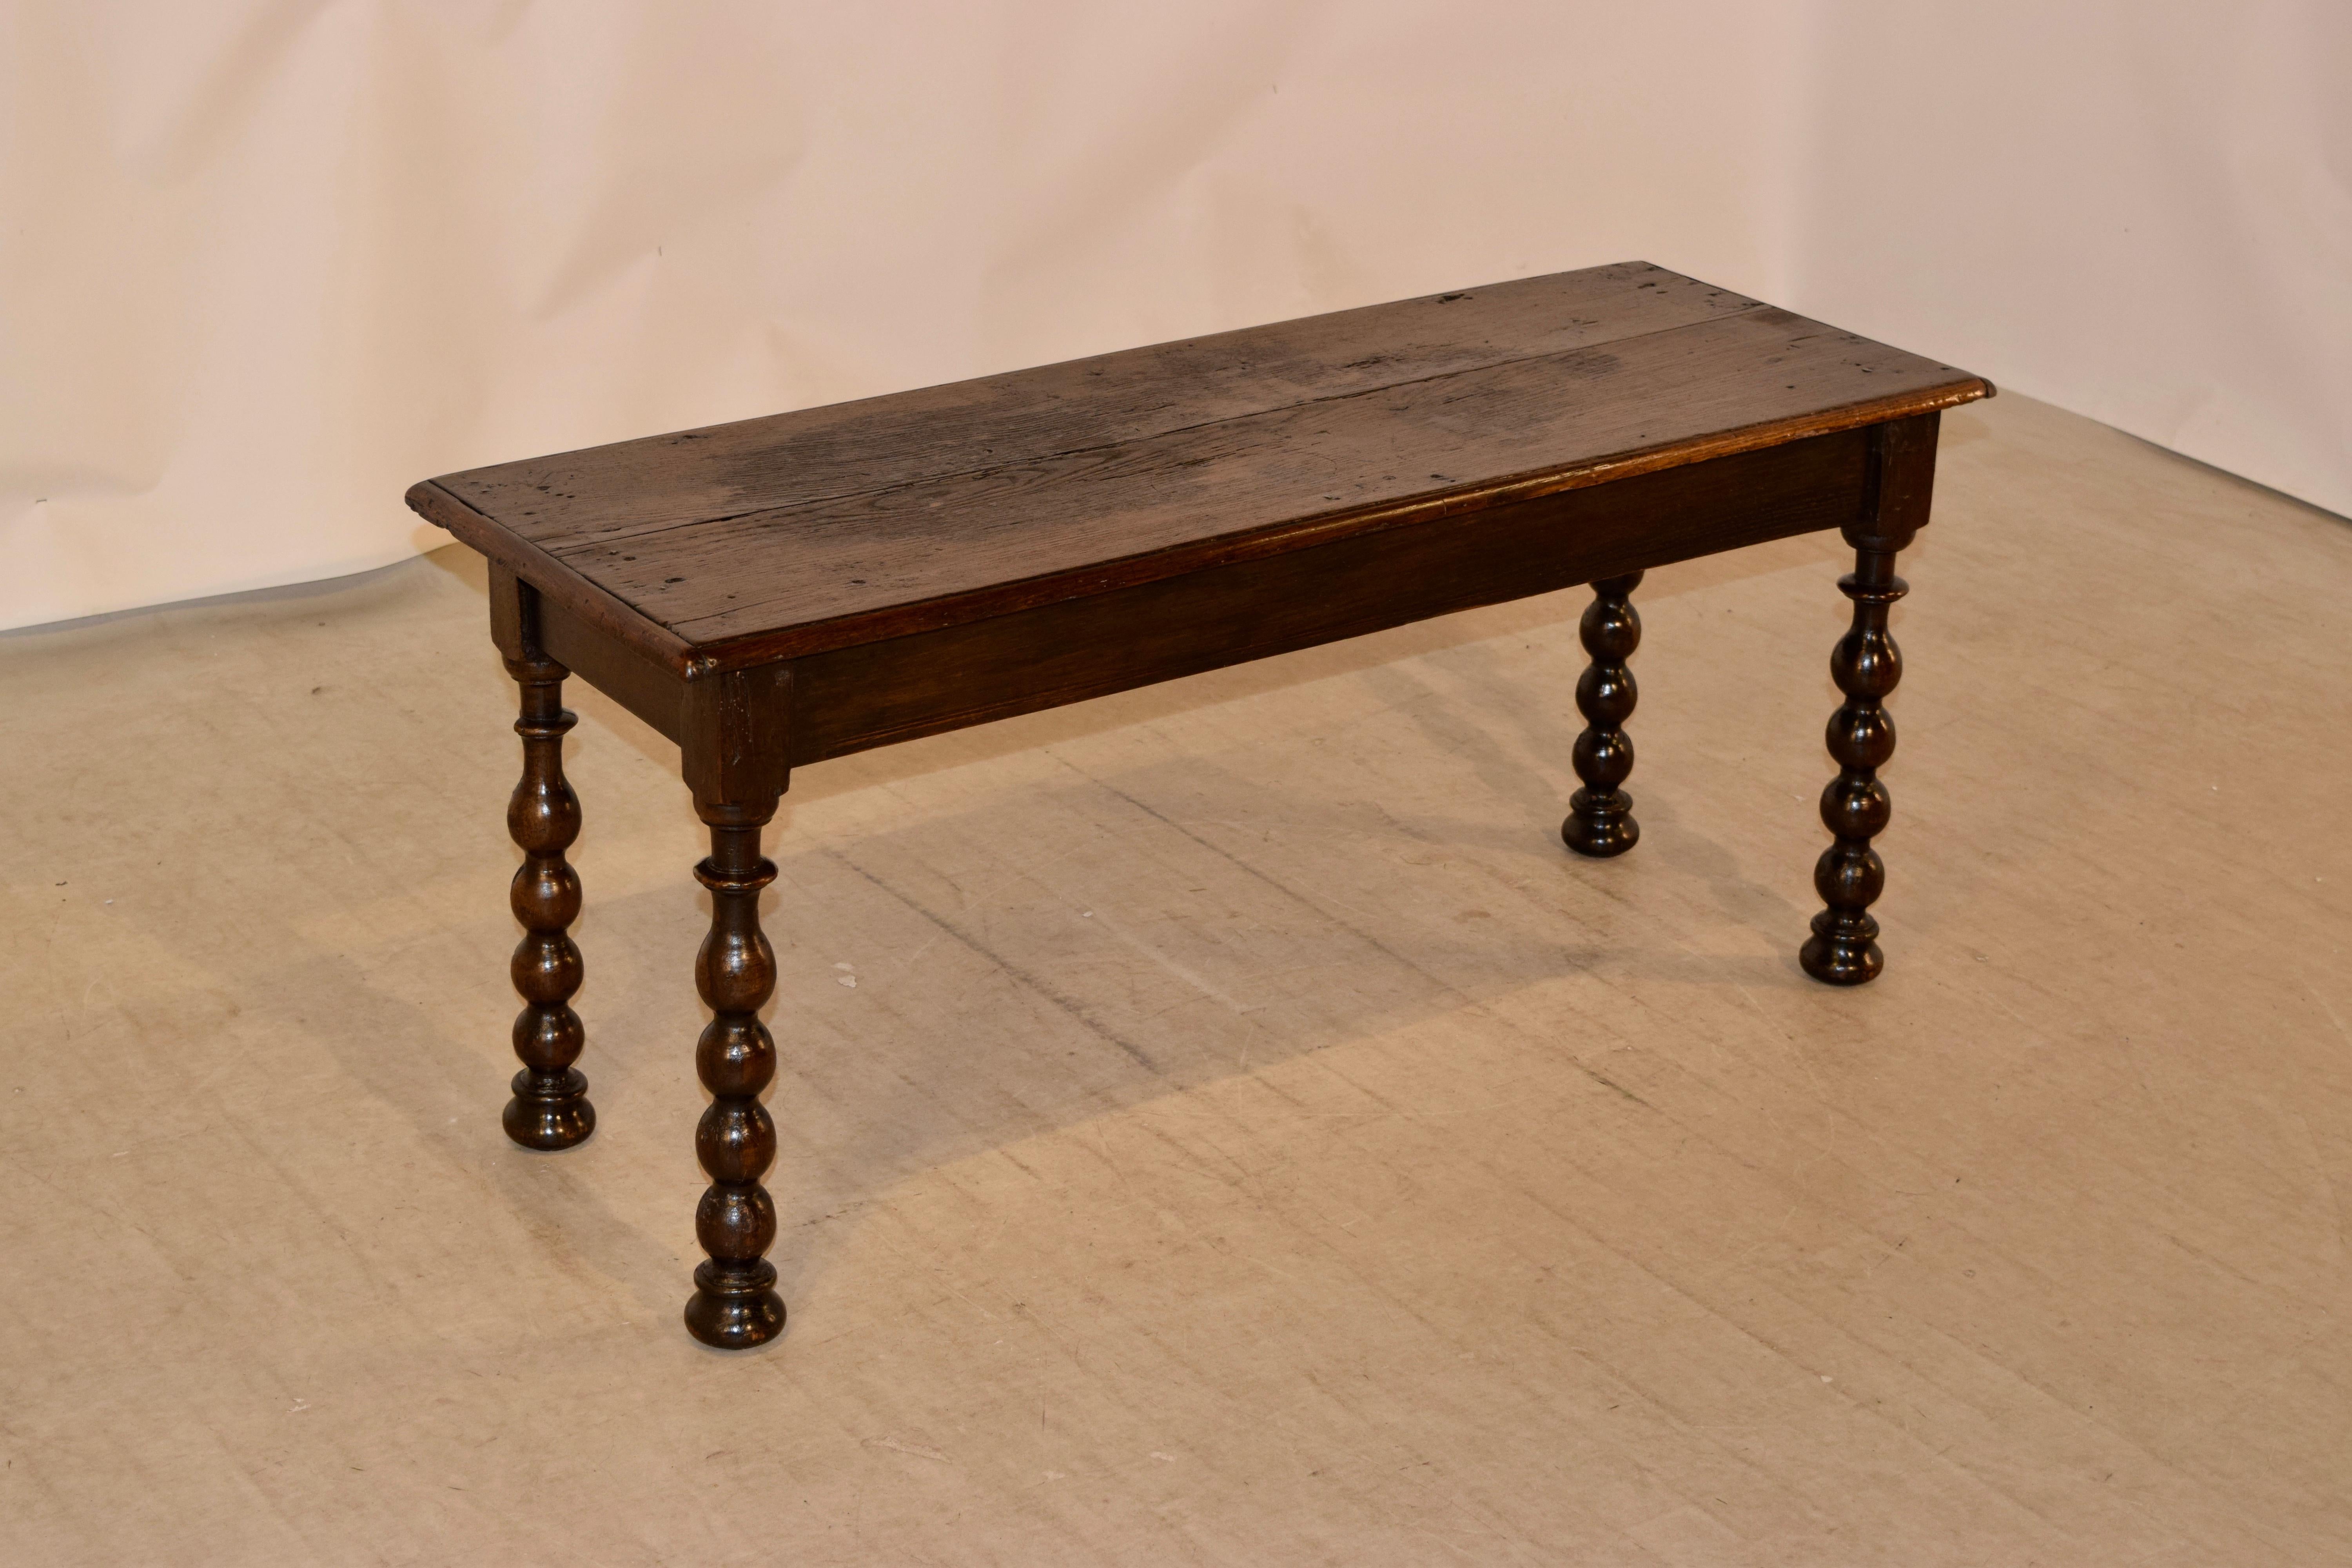 19th century oak bench from France with a beveled edge around the top following down to a simple apron and supported on hand turned bobbin legs, ending in bun feet.